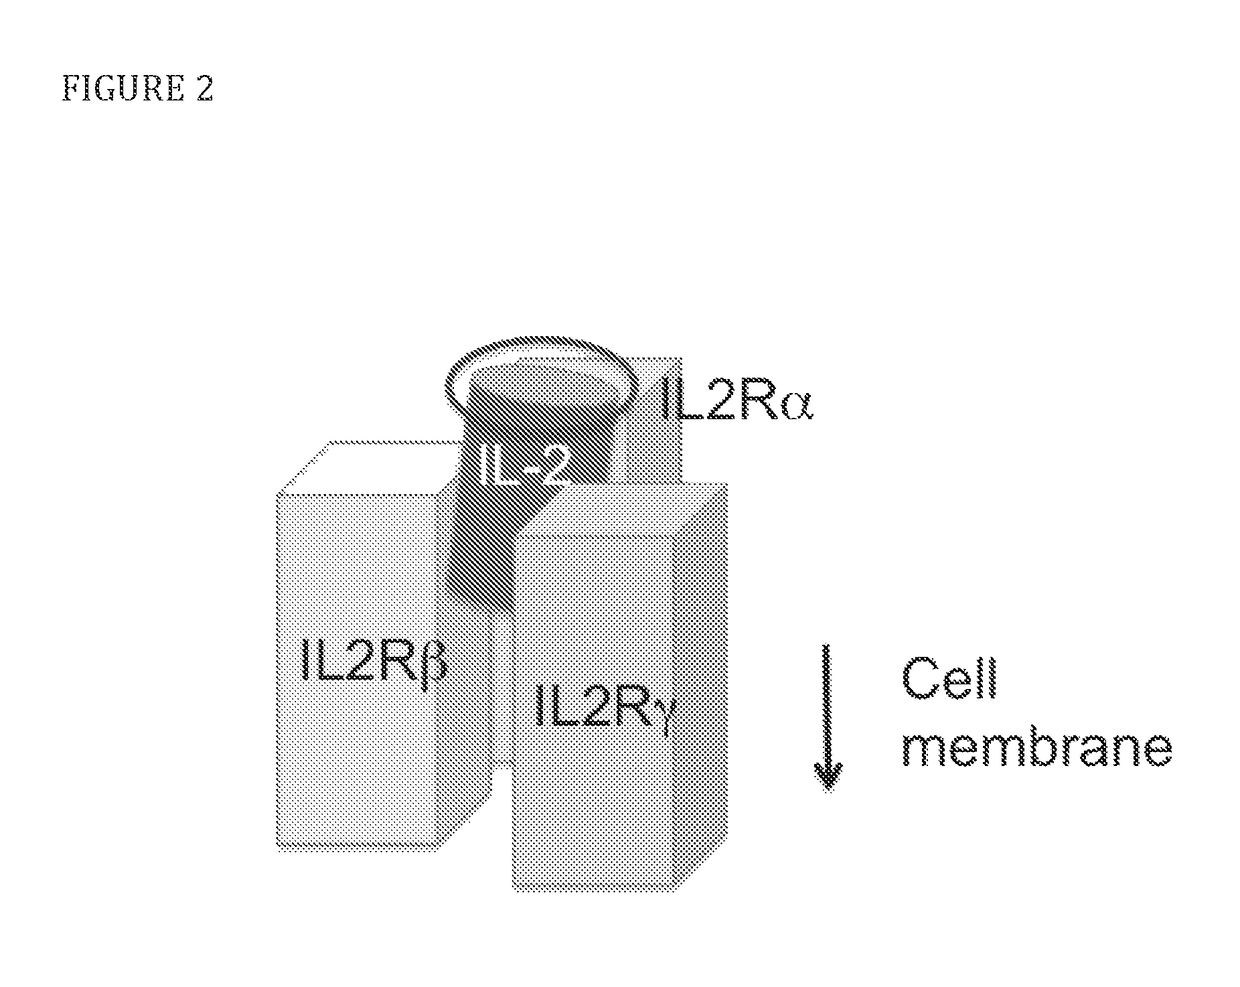 Modified IL-2 variants that selectively activate regulatory T cells